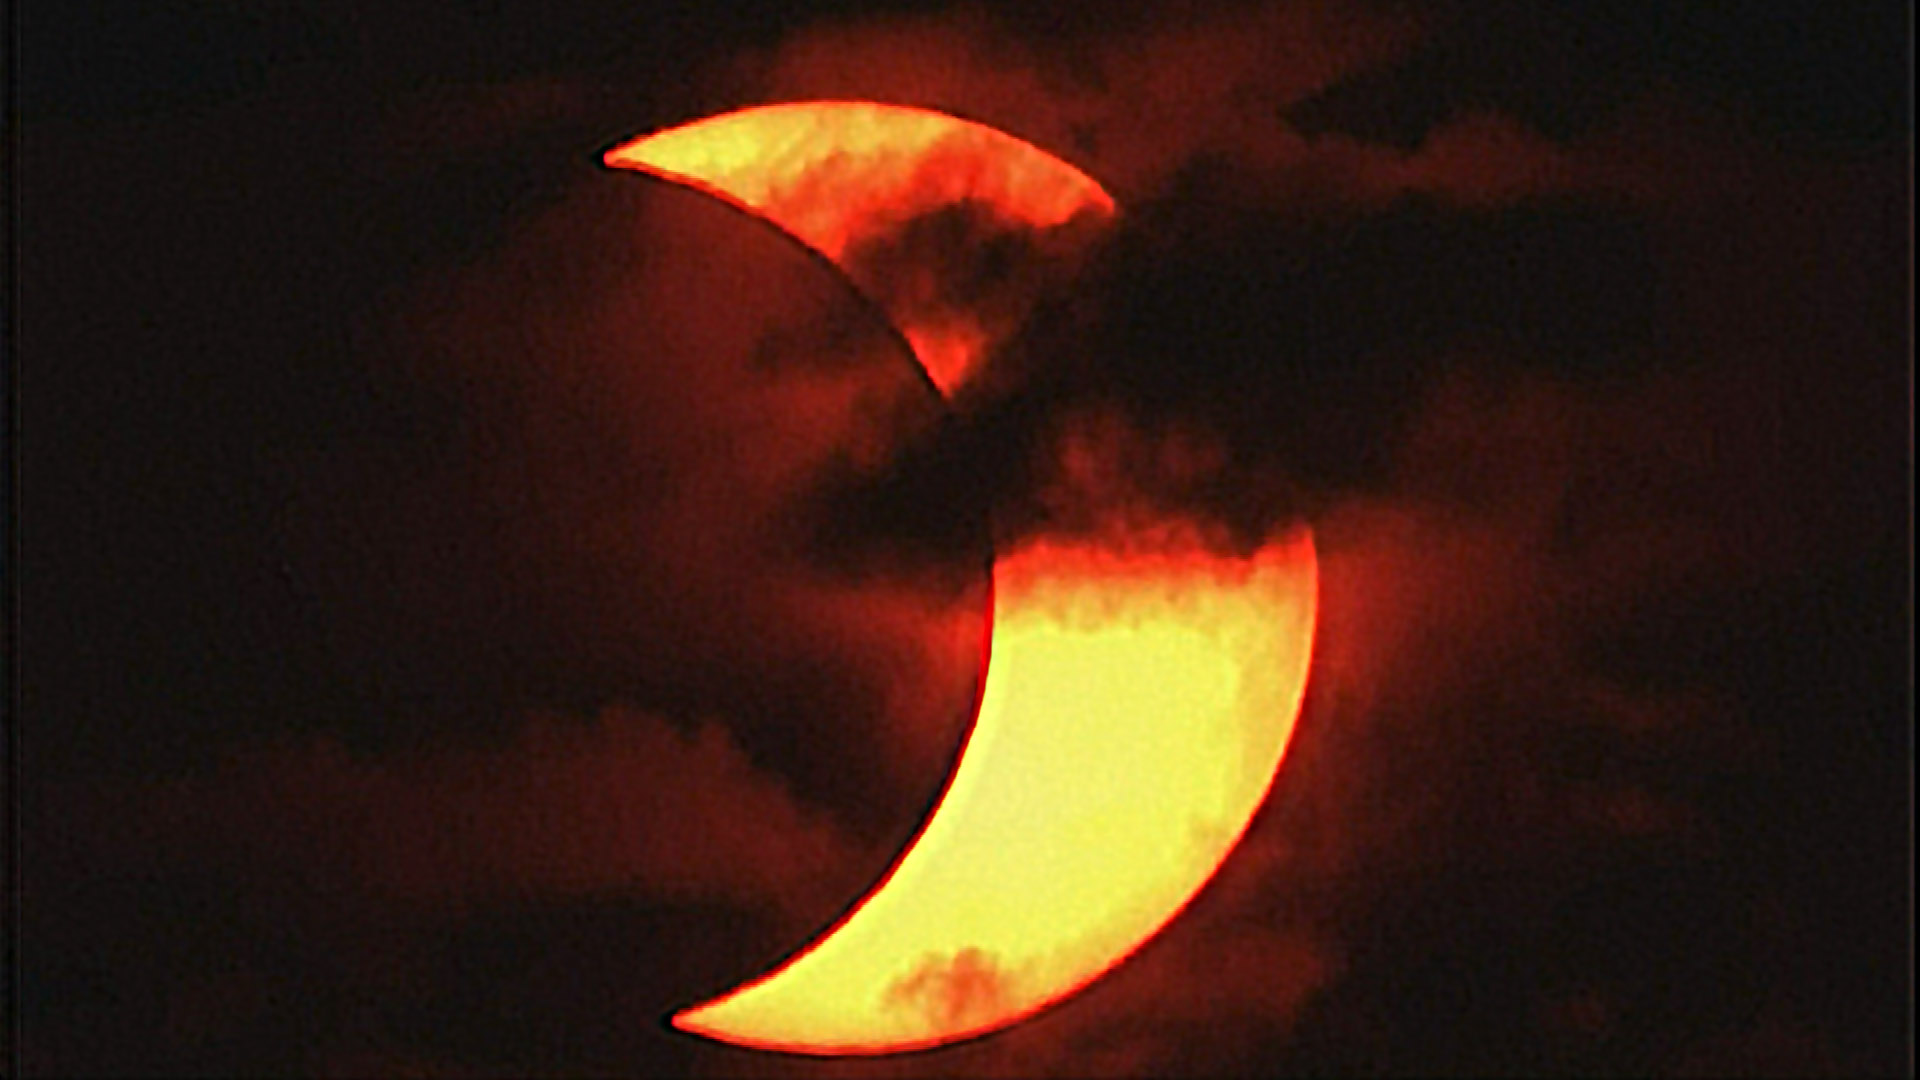 Watch 'Ring of Fire' solar eclipse as seen from Ontario